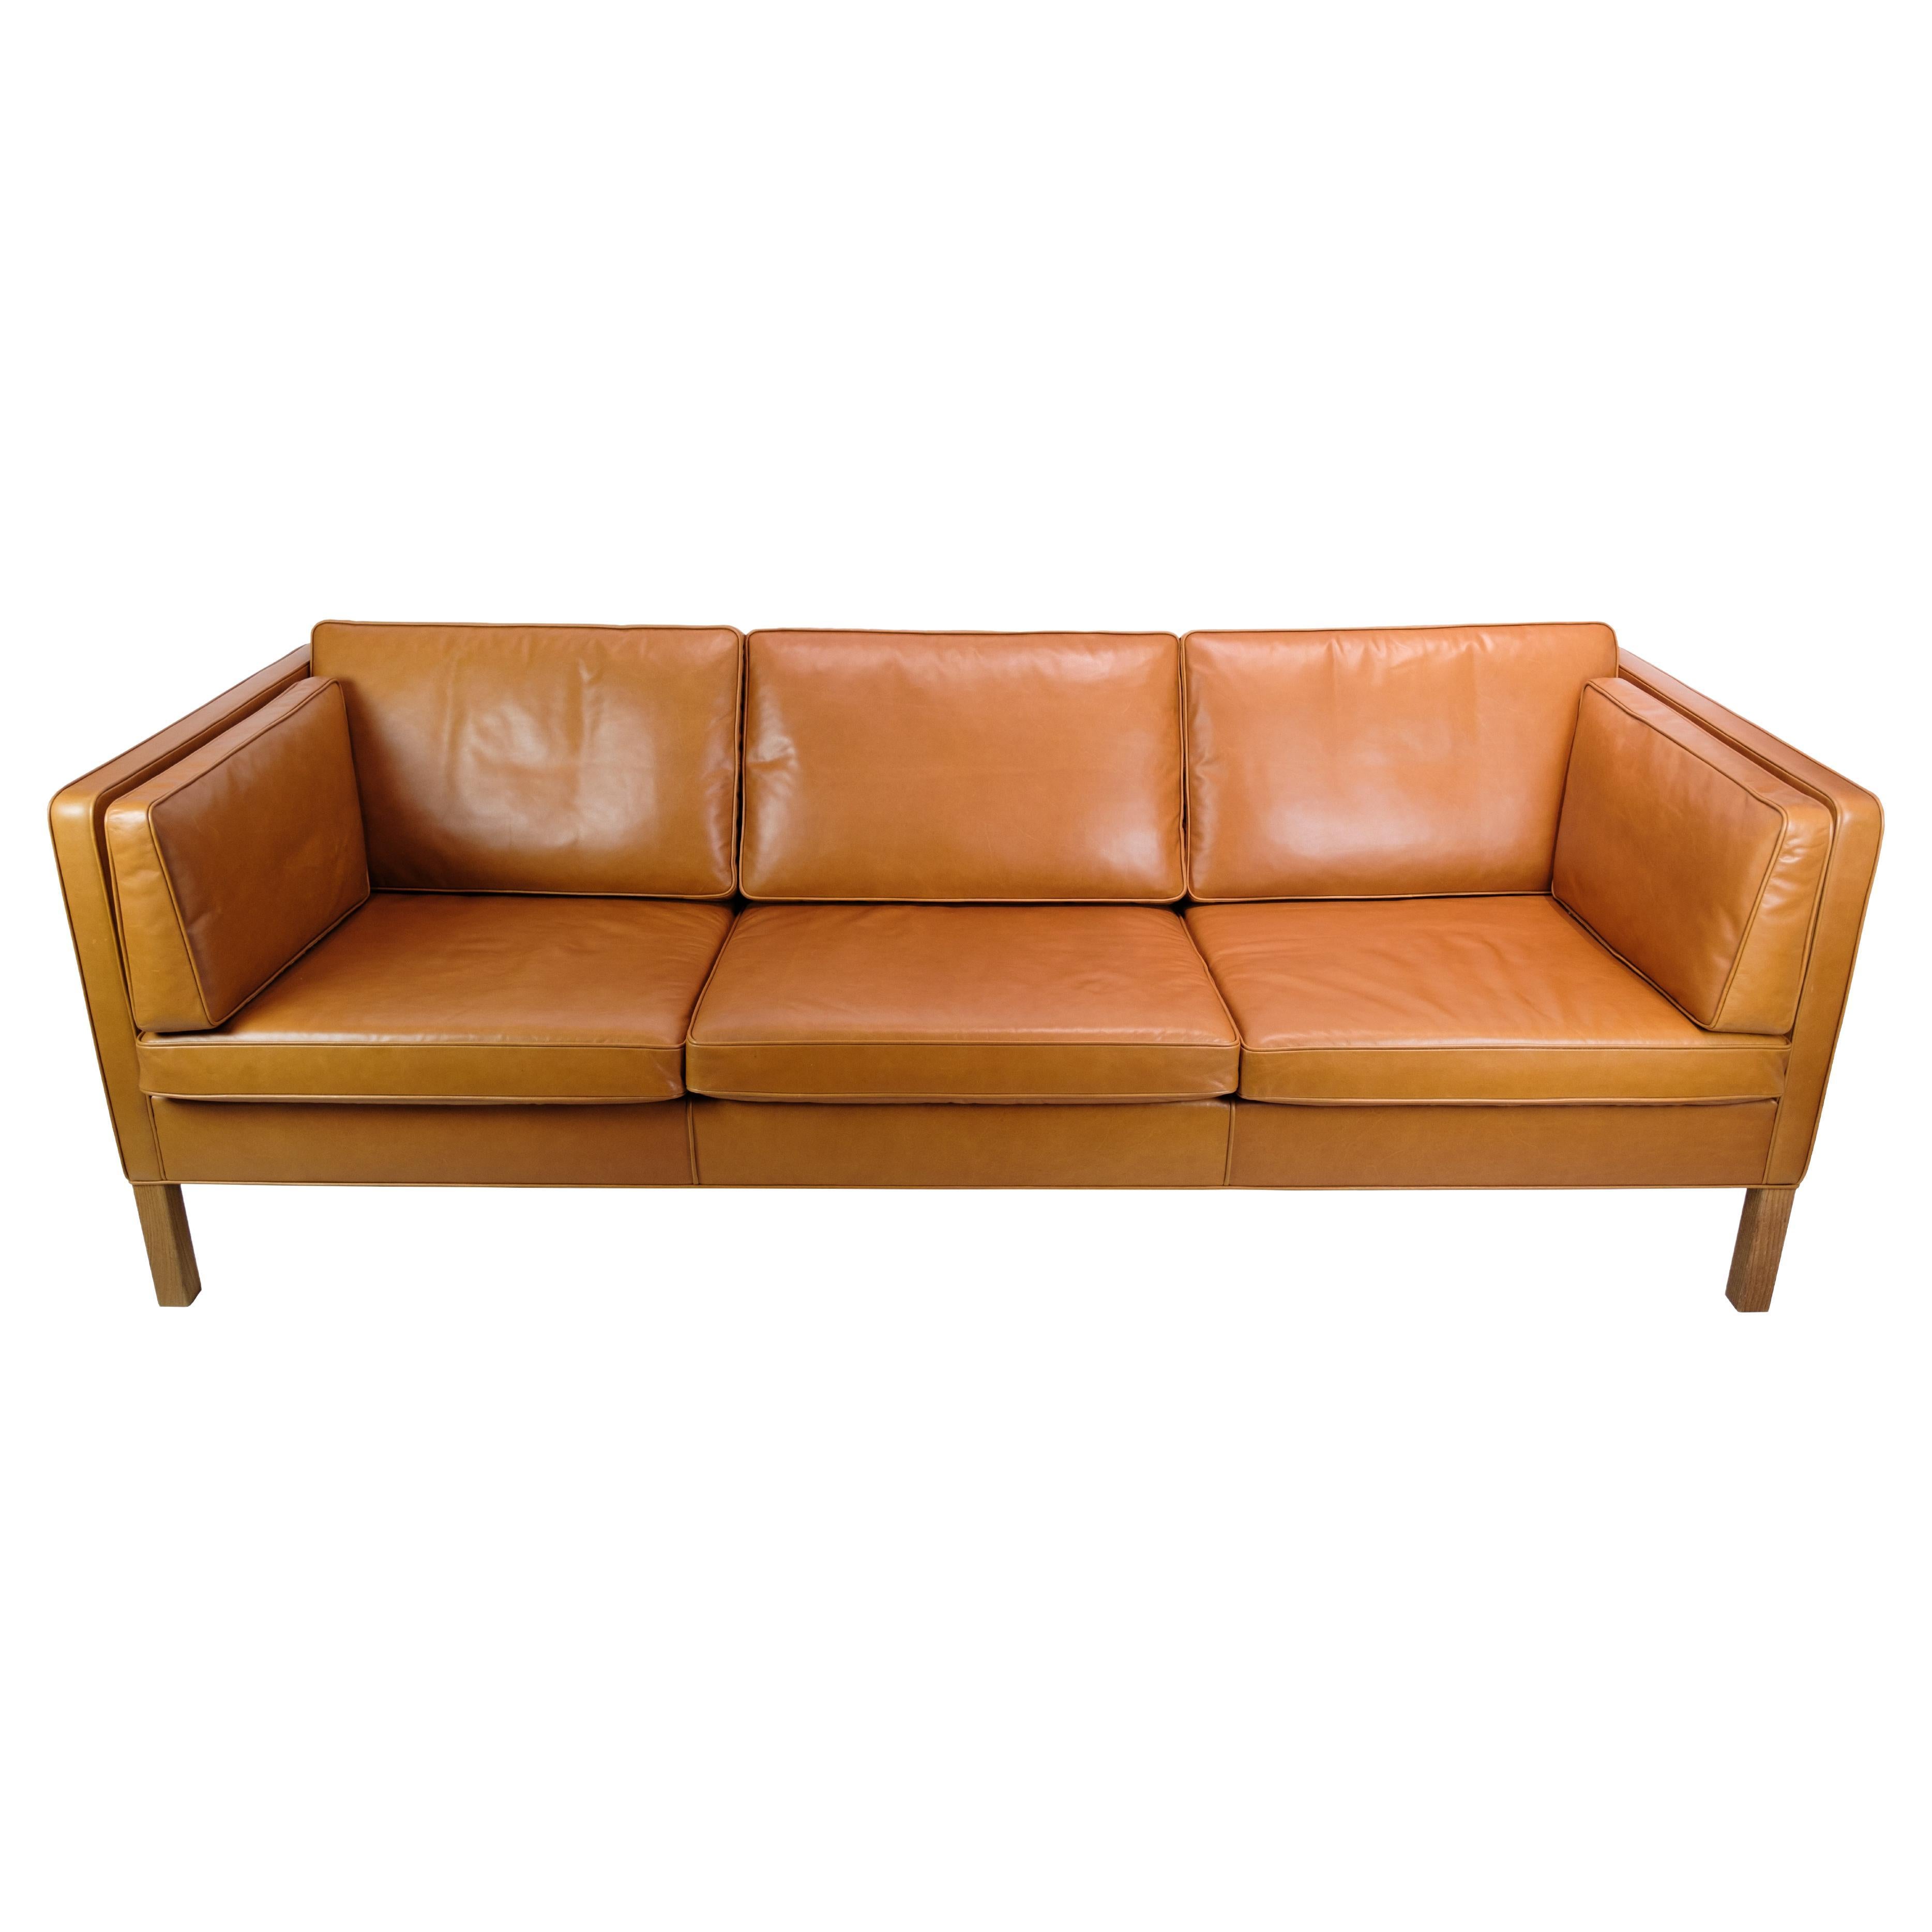 Three-seater sofa In Cognac leather, Model 2333 By Børge Mogensen From 1960s For Sale